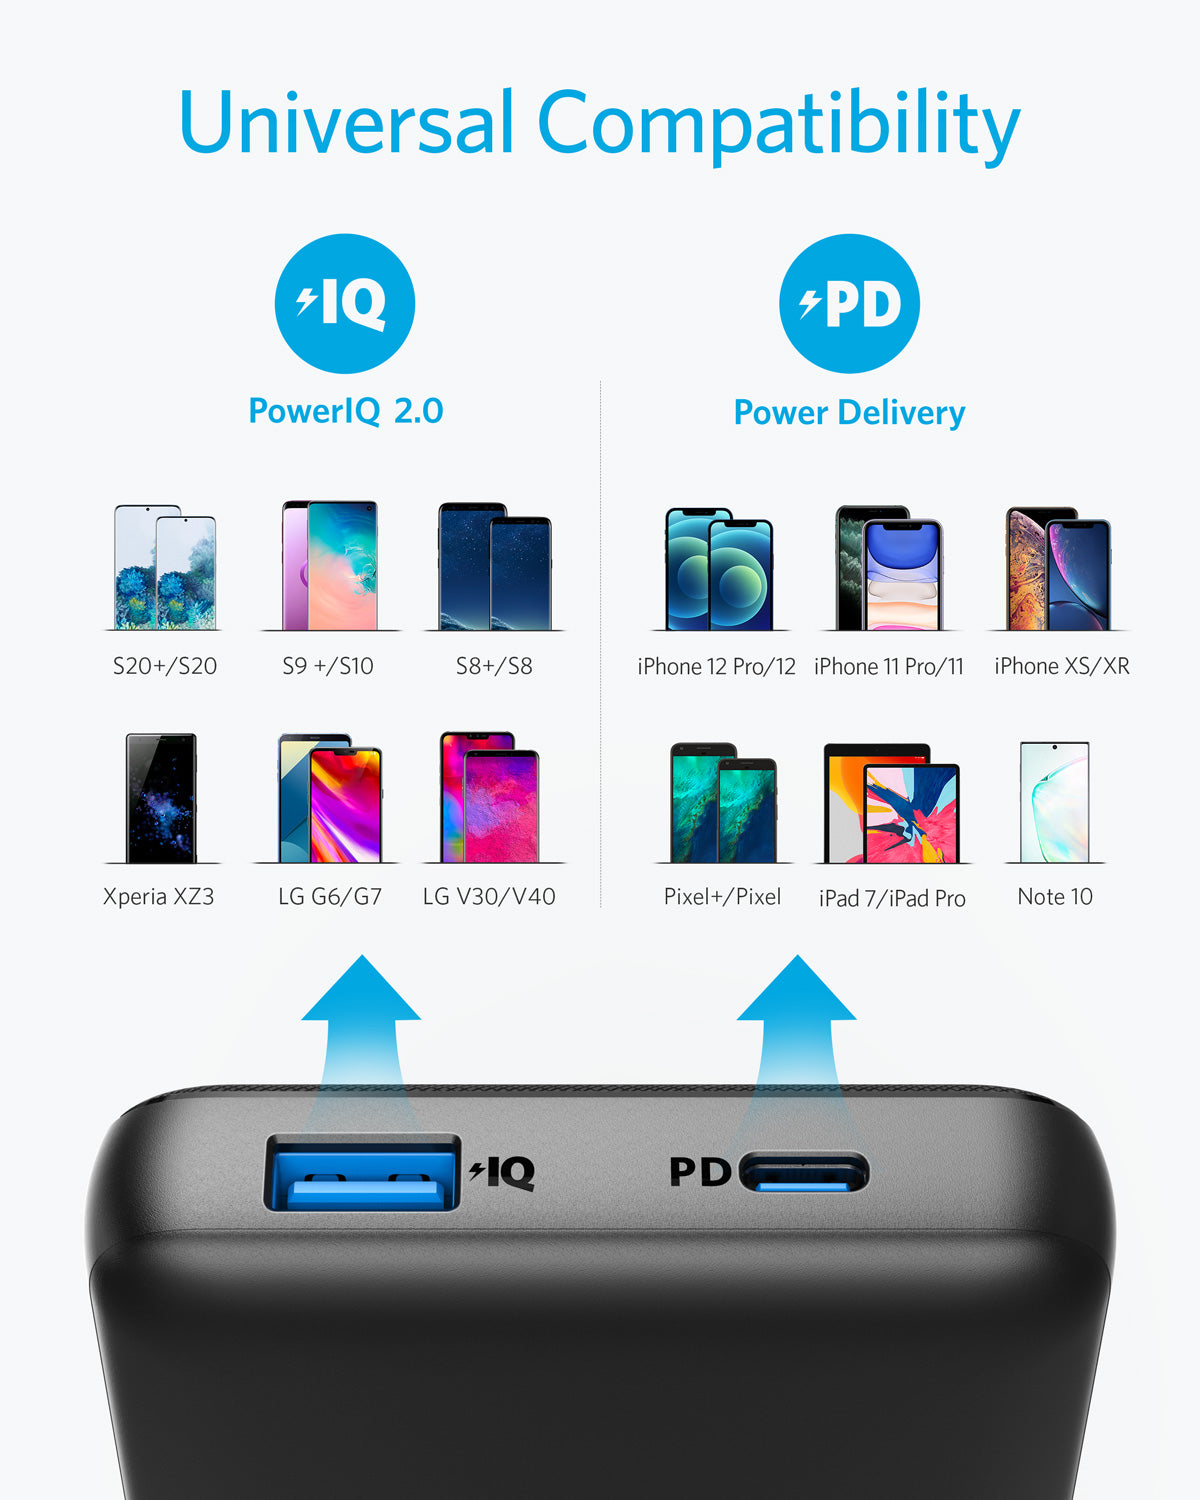 Anker USB-C Power Bank, 323 Portable Charger (PowerCore PIQ), High-Capacity  10,000mAh Battery Pack for iPhone 14/14 Pro / 14 Pro Max/Samsung/Pixel/LG